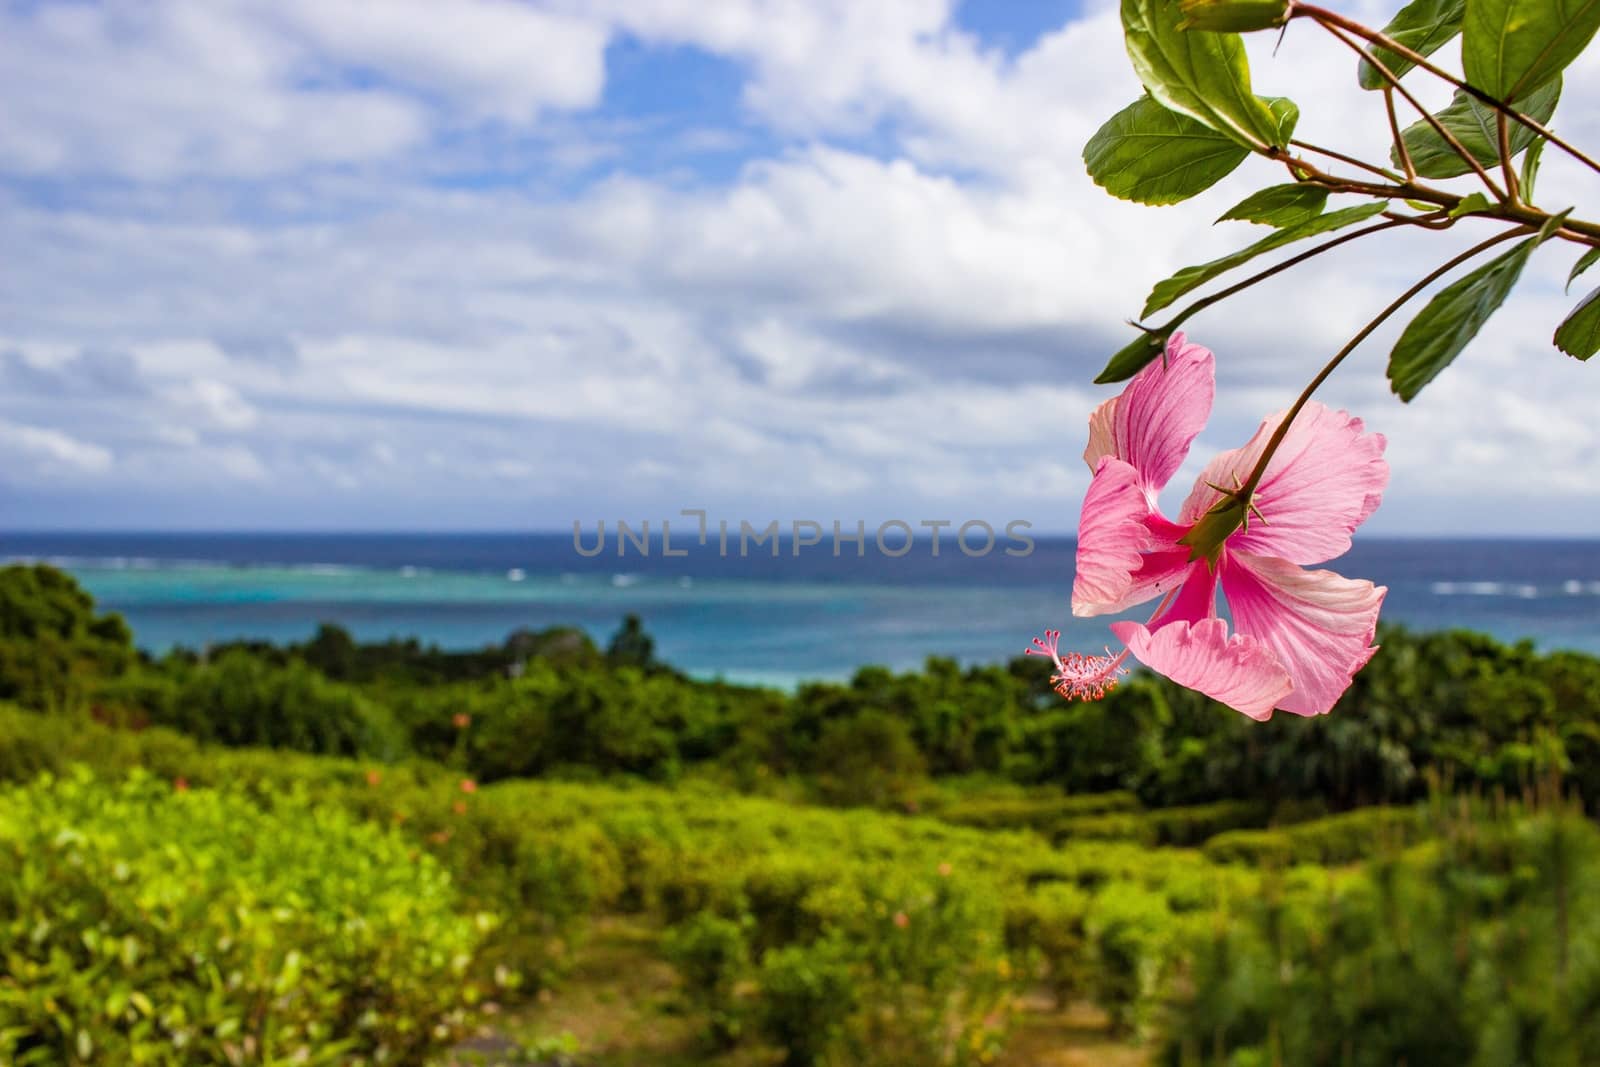 Hibiscus flower, beautiful green landscape and blue ocean.